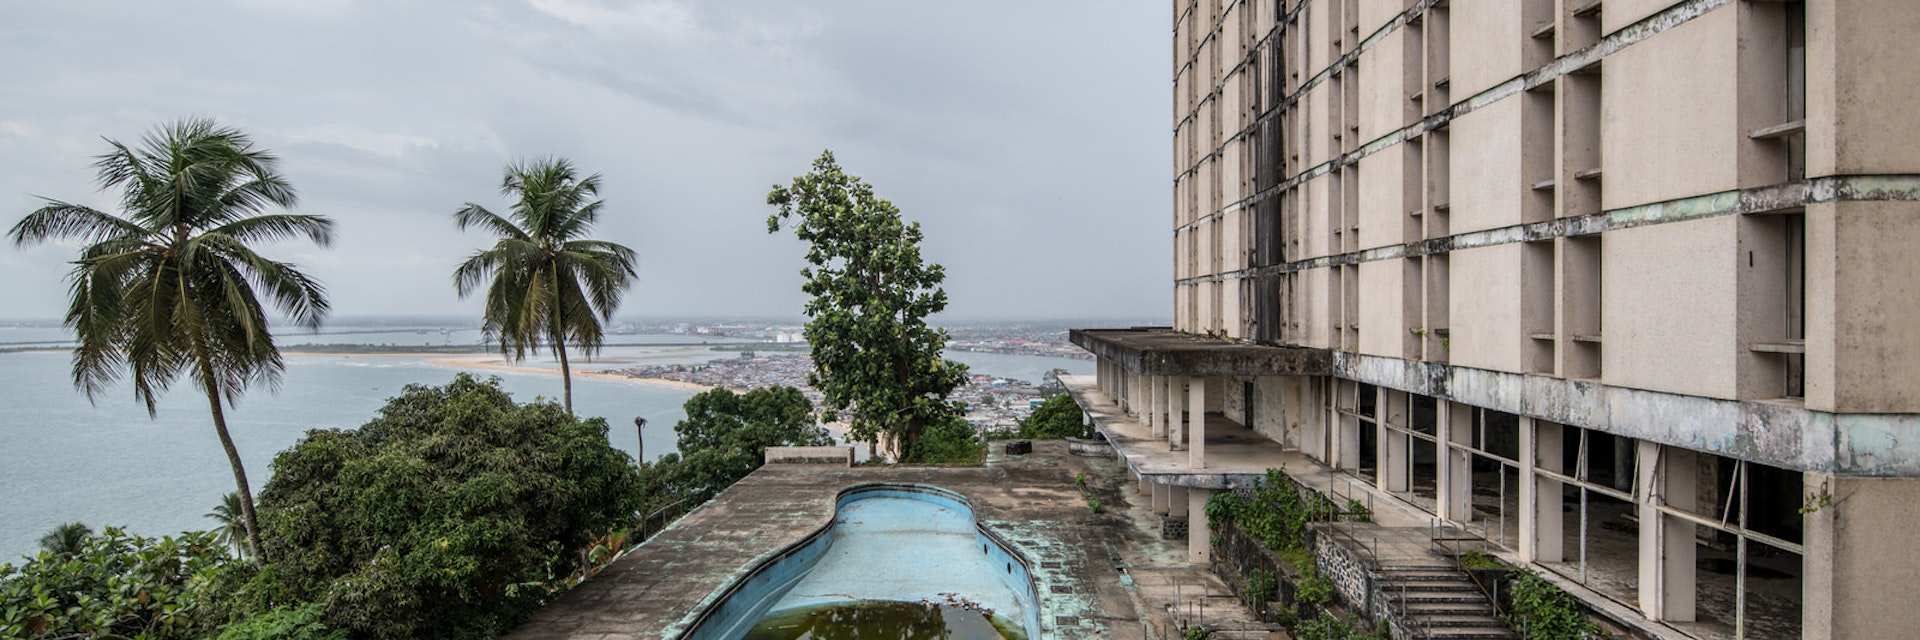 A pool at the abandoned Ducor Hotel, once the most prominent hotels in Monrovia, Liberia